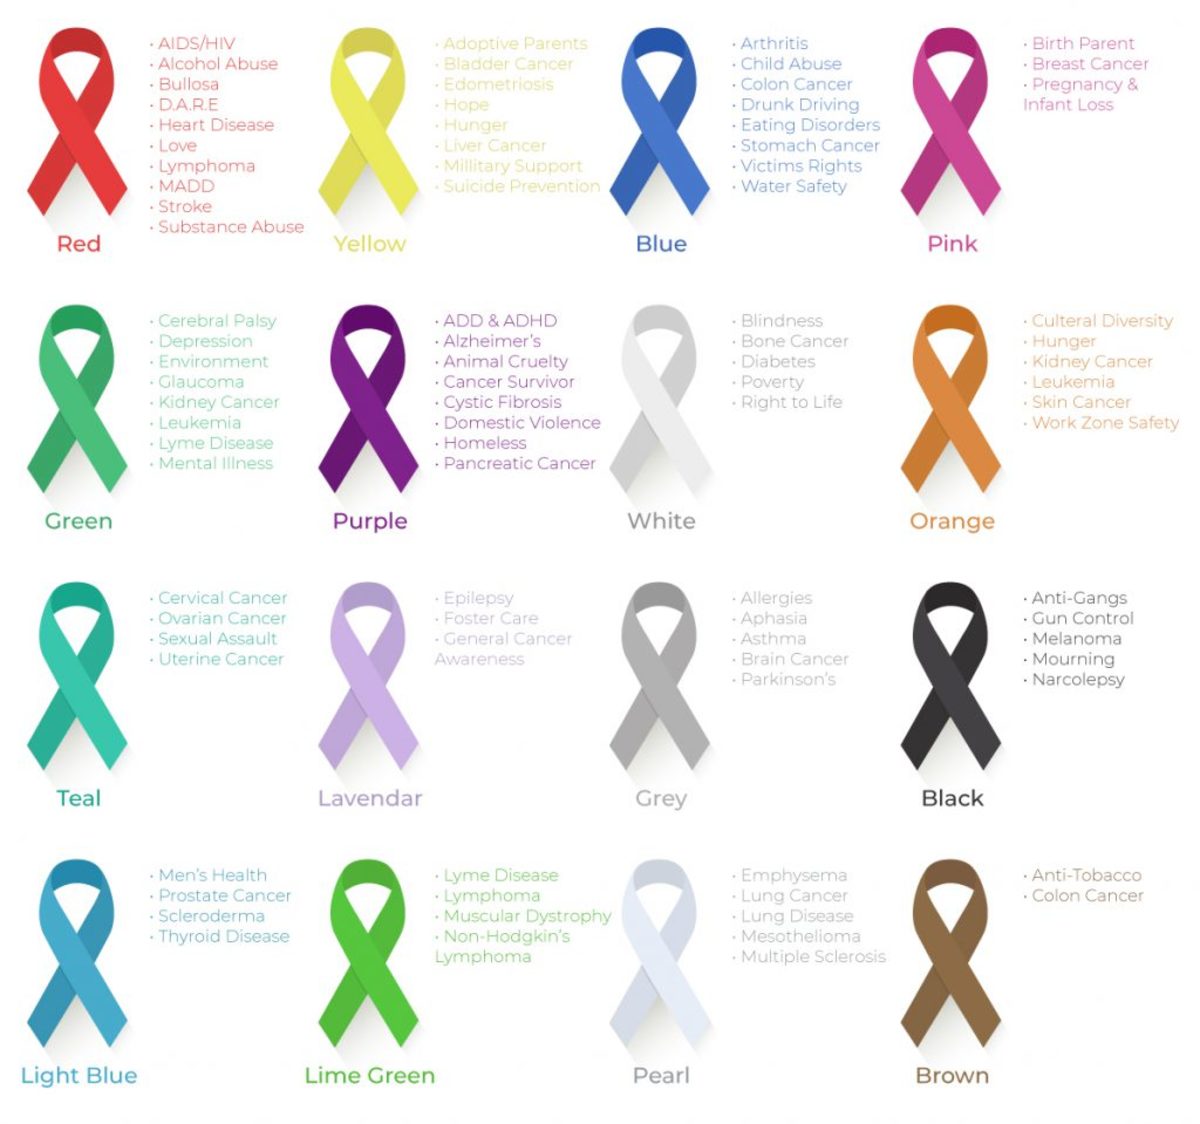 Different colors of ribbons are used to create awareness for different types of illnesses and conditions